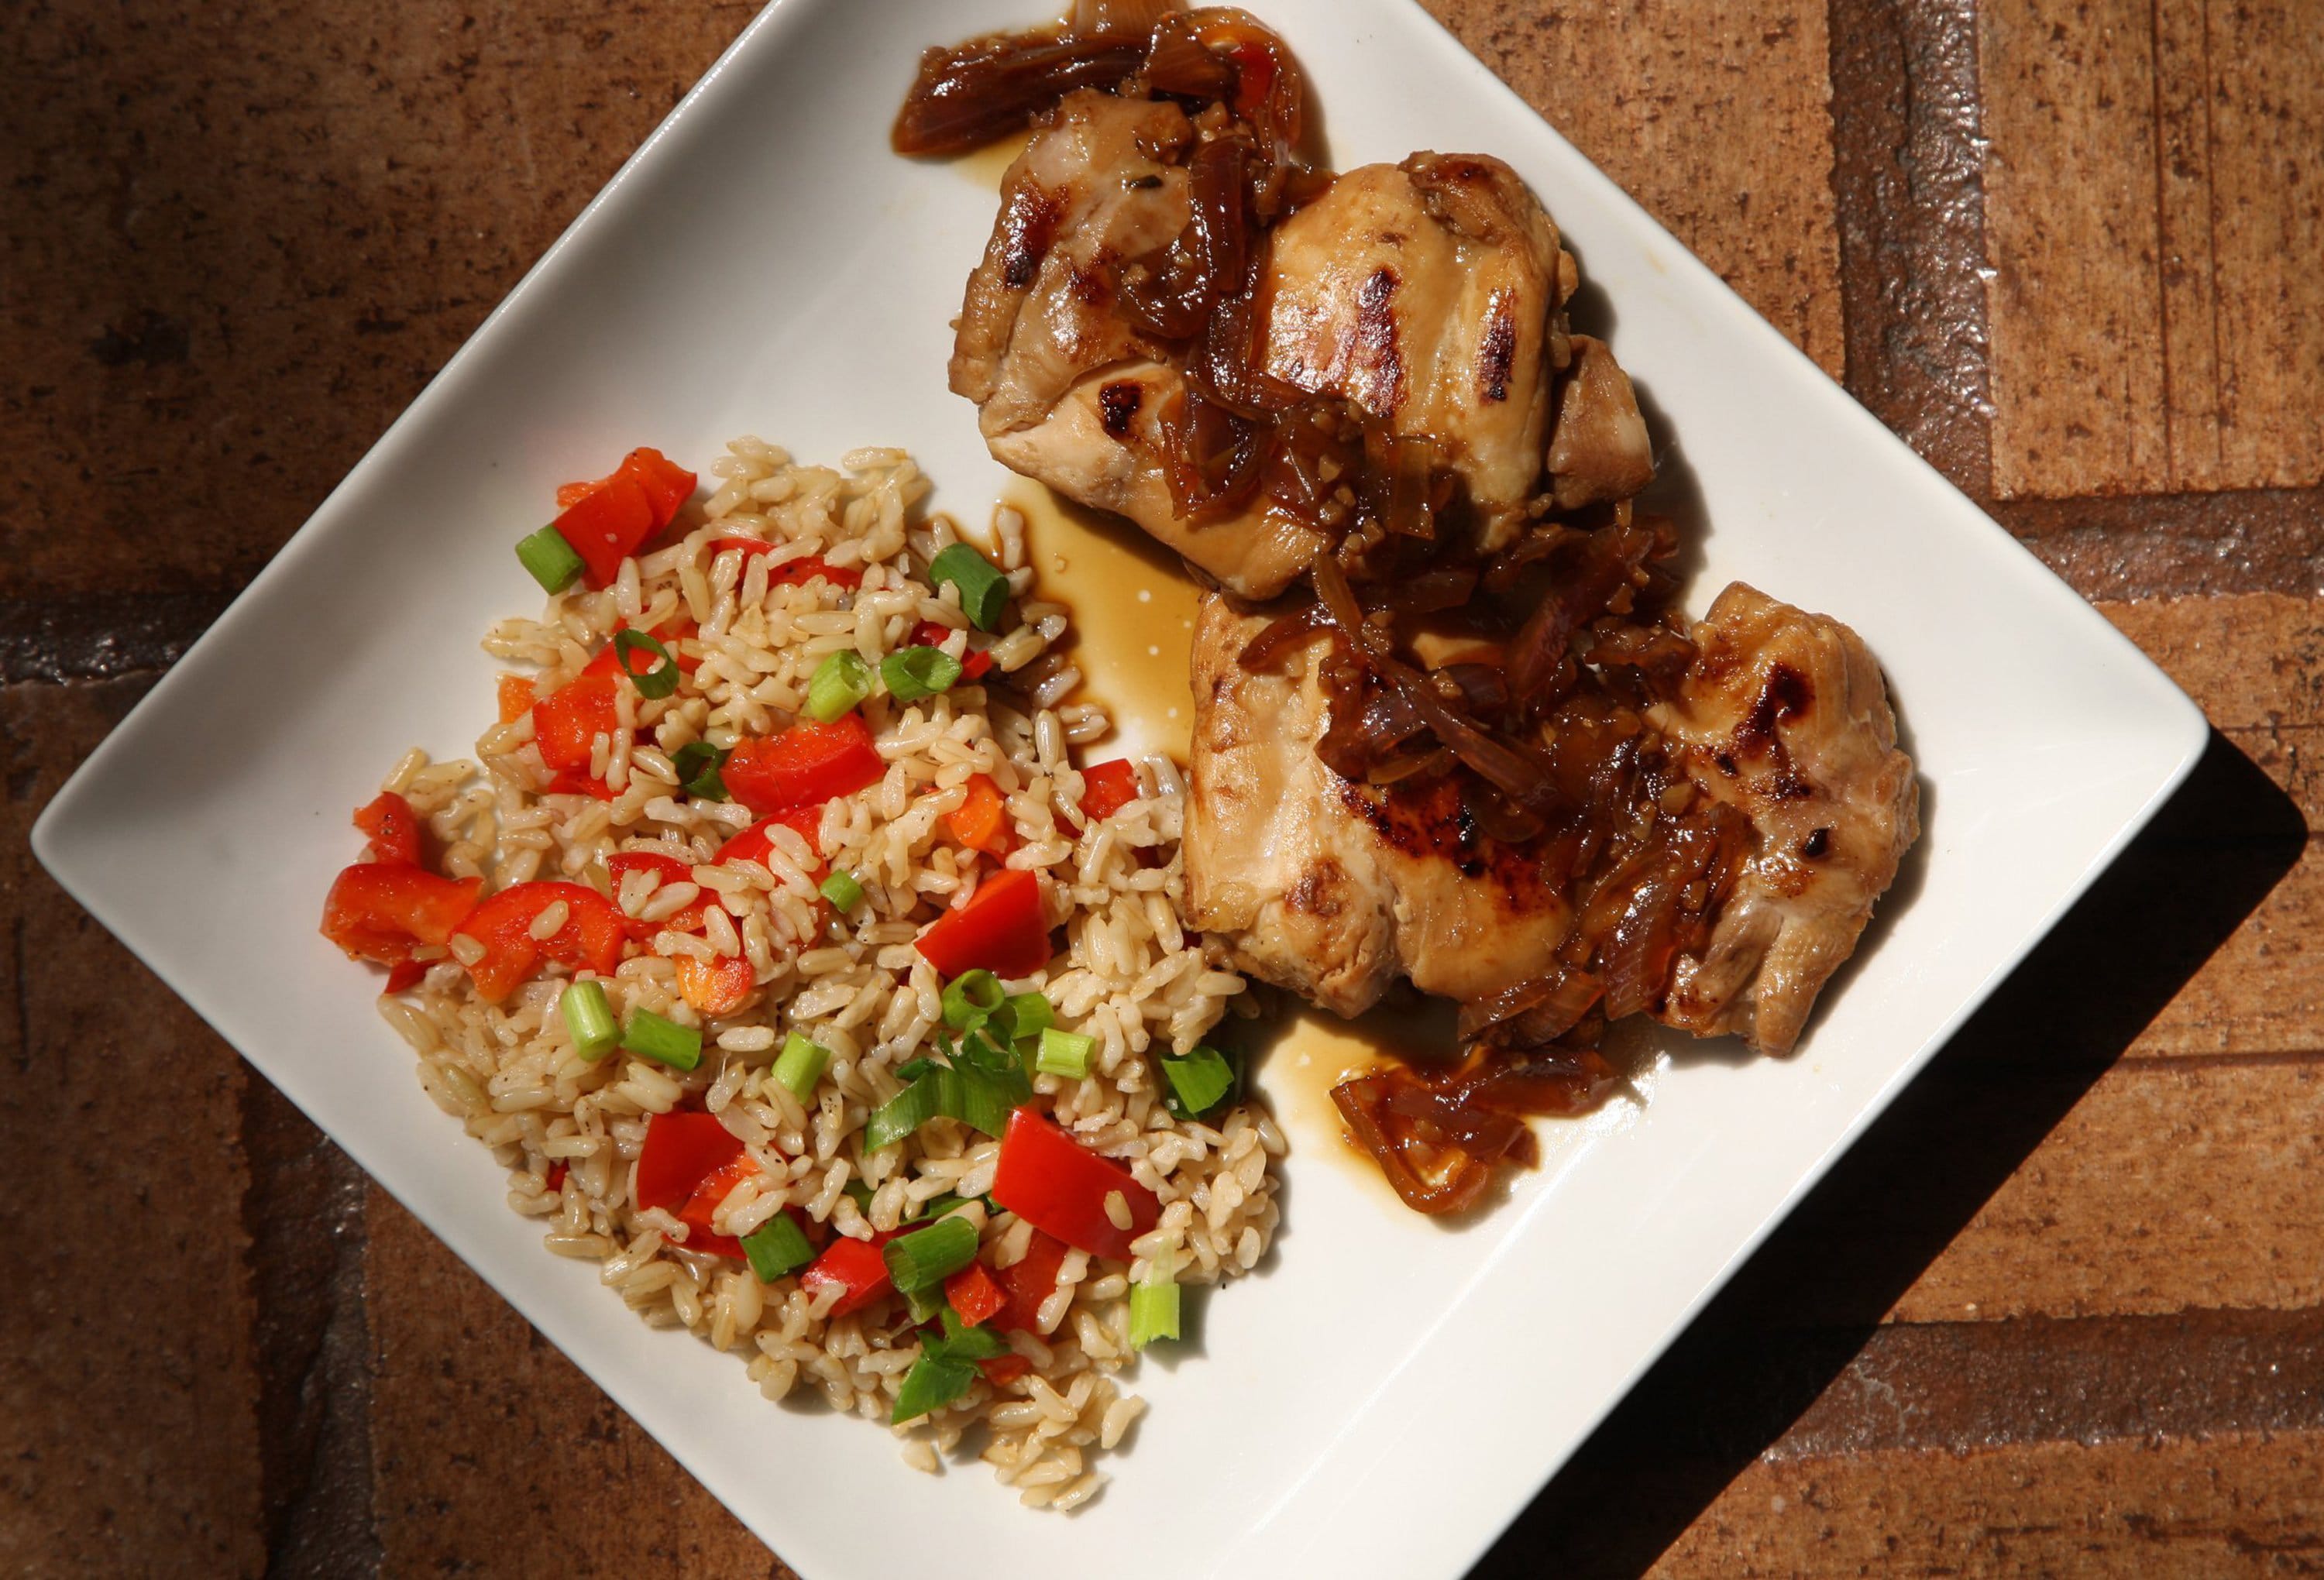 Chicken Adobo is a popular dish in the Phillipines that takes time to simmer the meat.